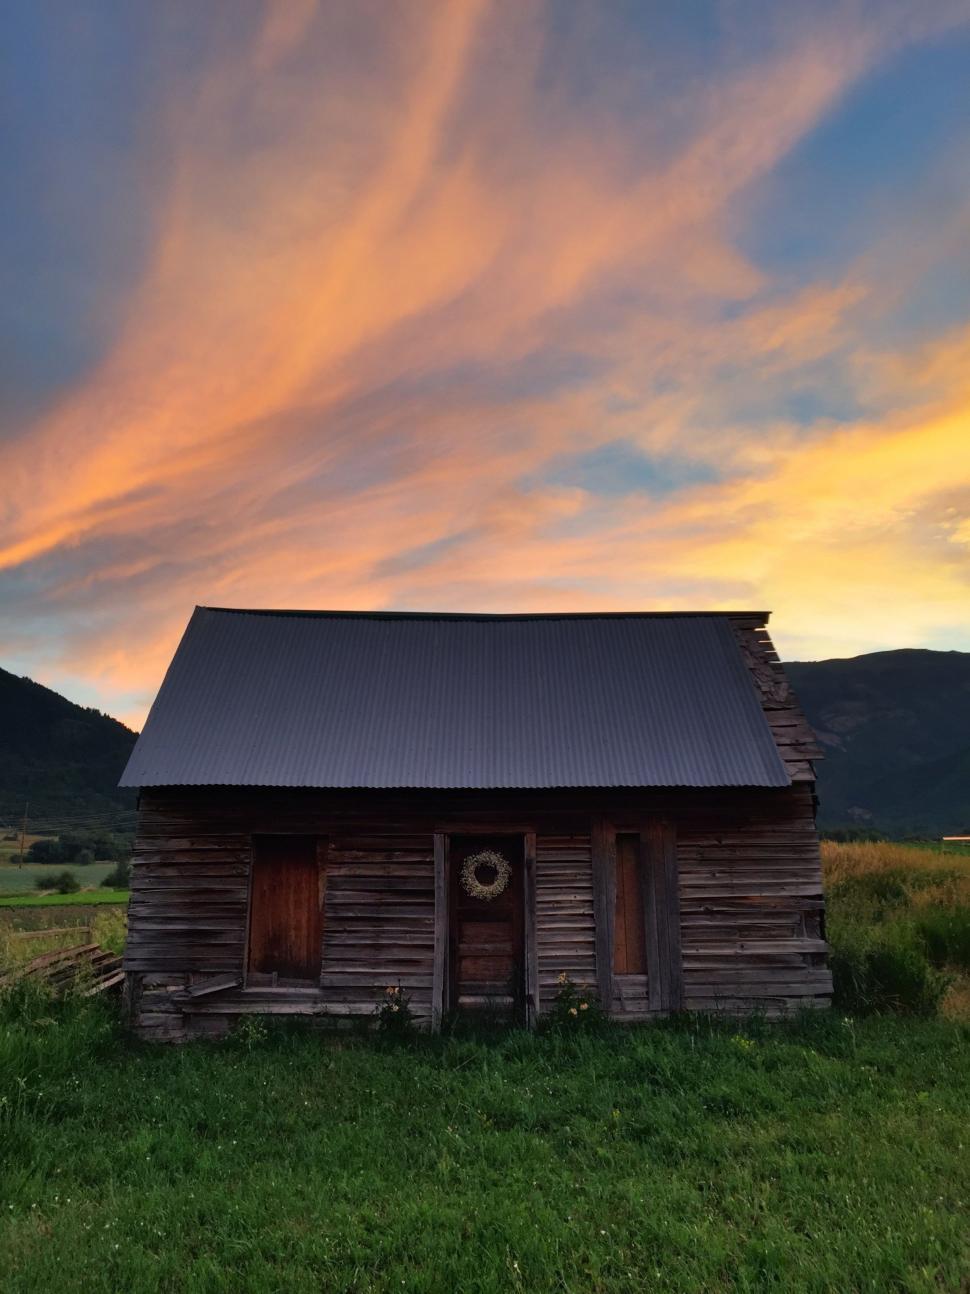 Free Image of Small Cabin in Field With Sunset 